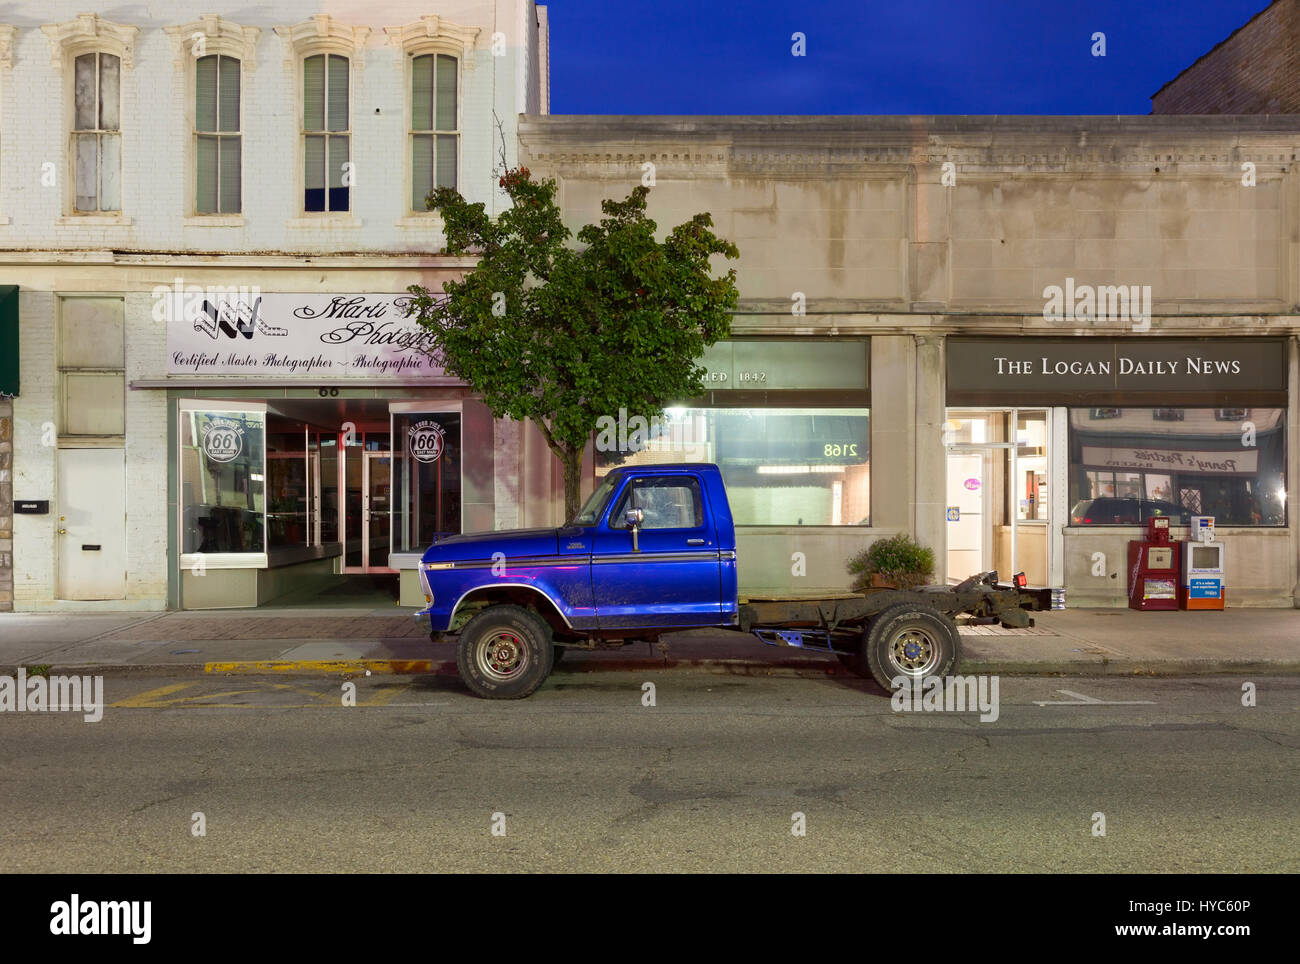 The Logan Daily News building and an old pickup truck at dusk in downtown Logan, Hocking County, Ohio, USA. Stock Photo